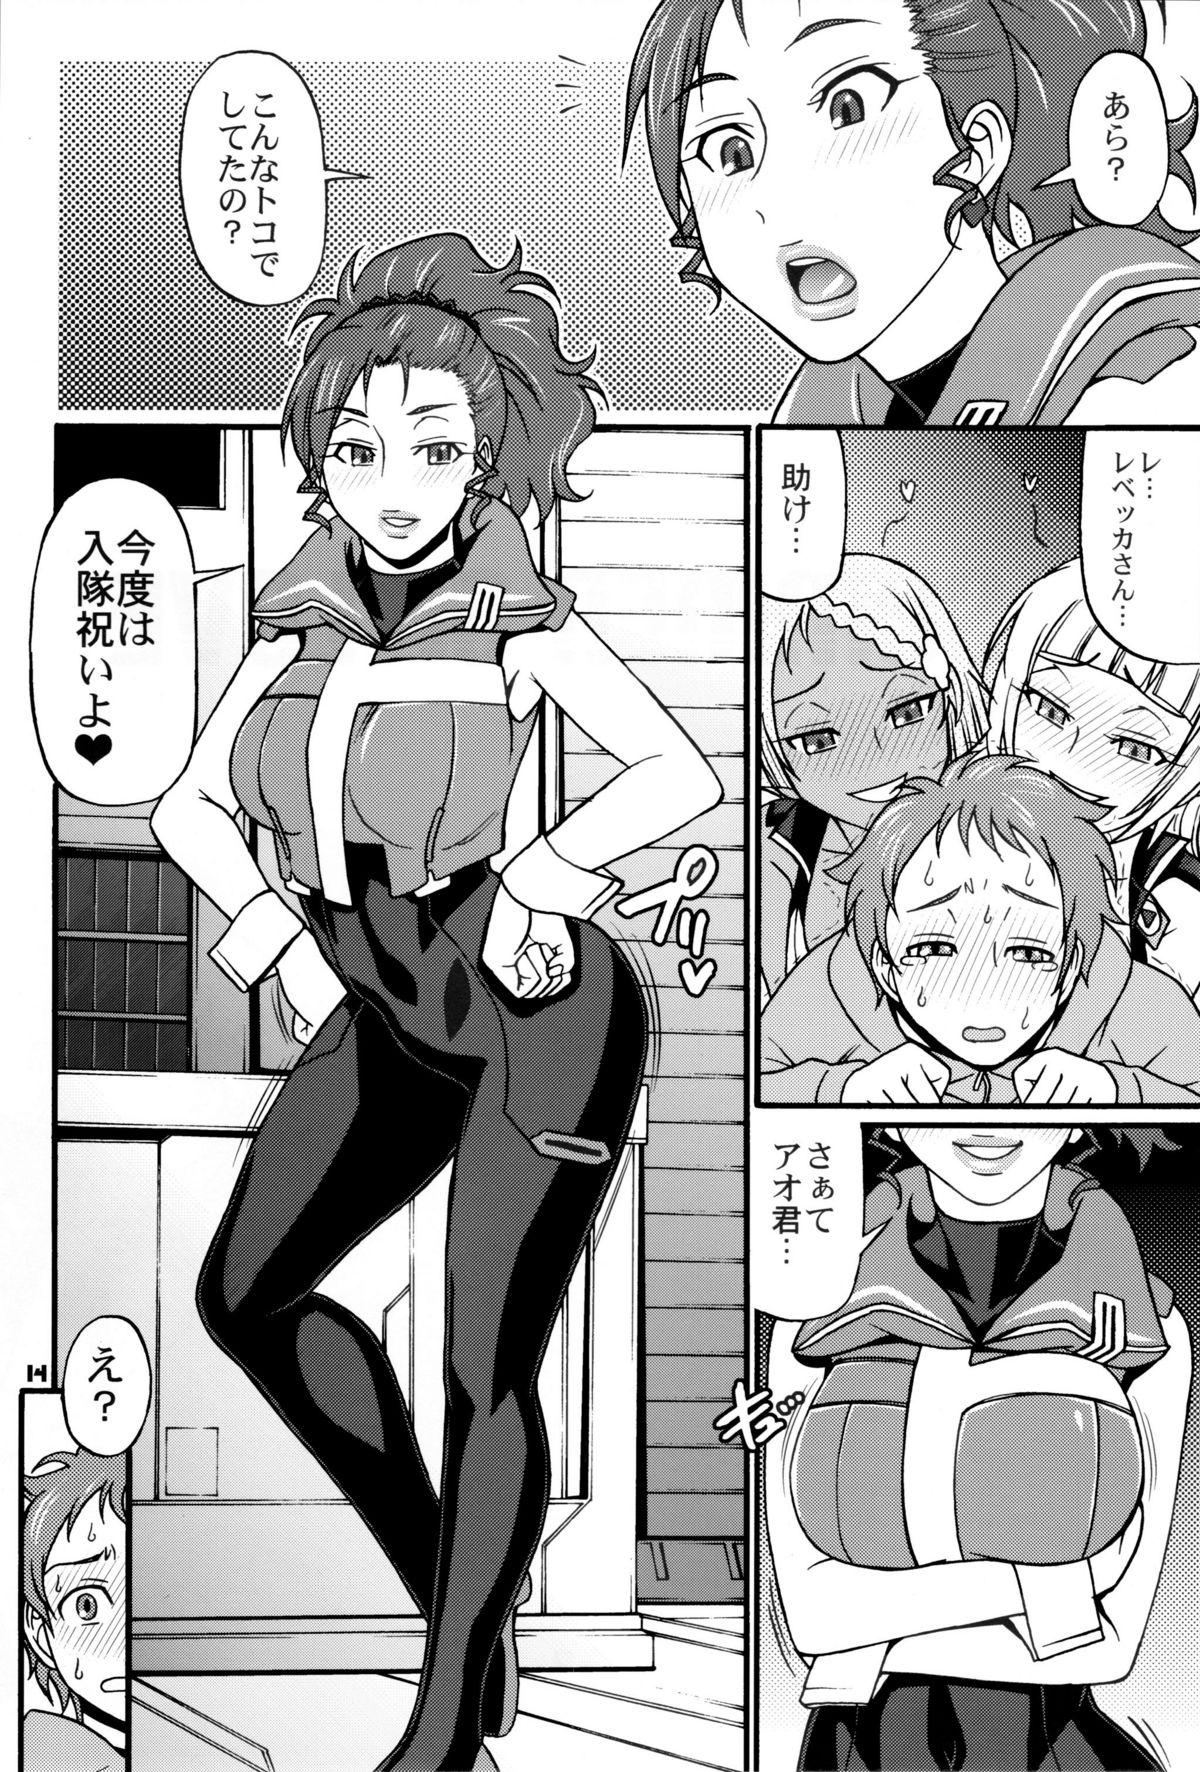 Grandmother SUMMER OF LOVE - Eureka seven ao Culo - Page 13